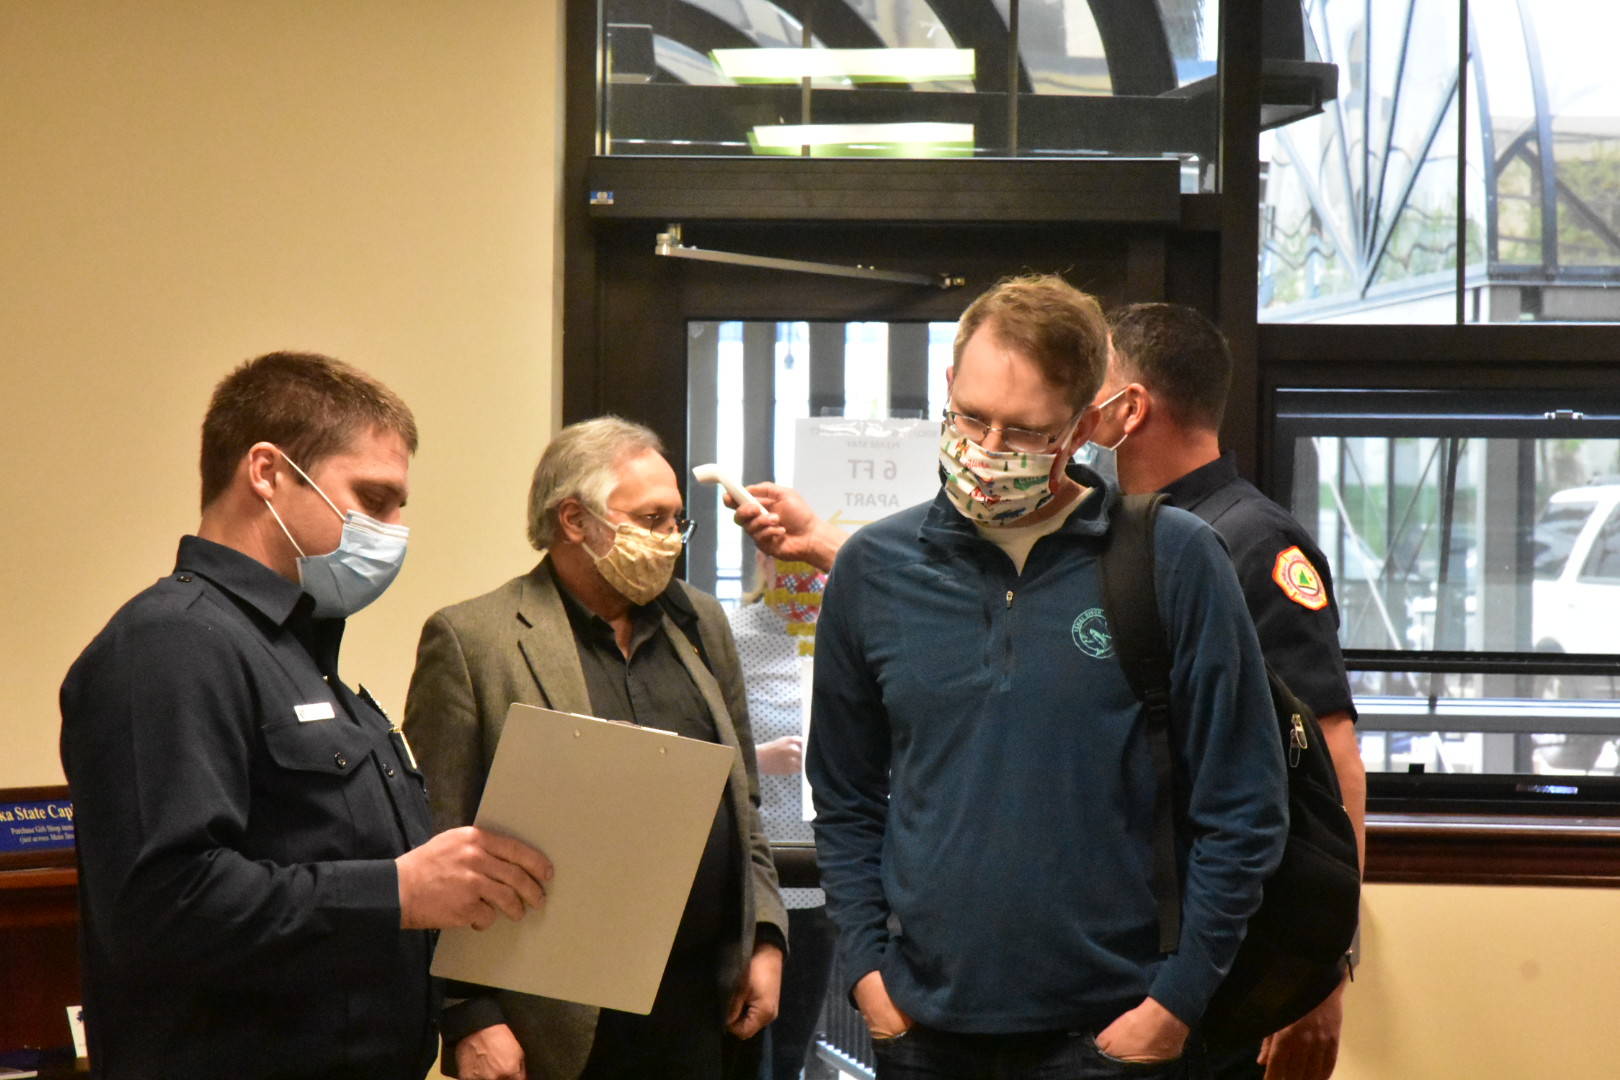 Rep. Lance Pruitt, R-Anchorage, answers screening questions upon entering the Capitol building. Behind him Rep. Dave Talerico, R-Healy, gets his temperature taken on Monday, May 18, 2020. (Peter Segall | Juneau Empire)